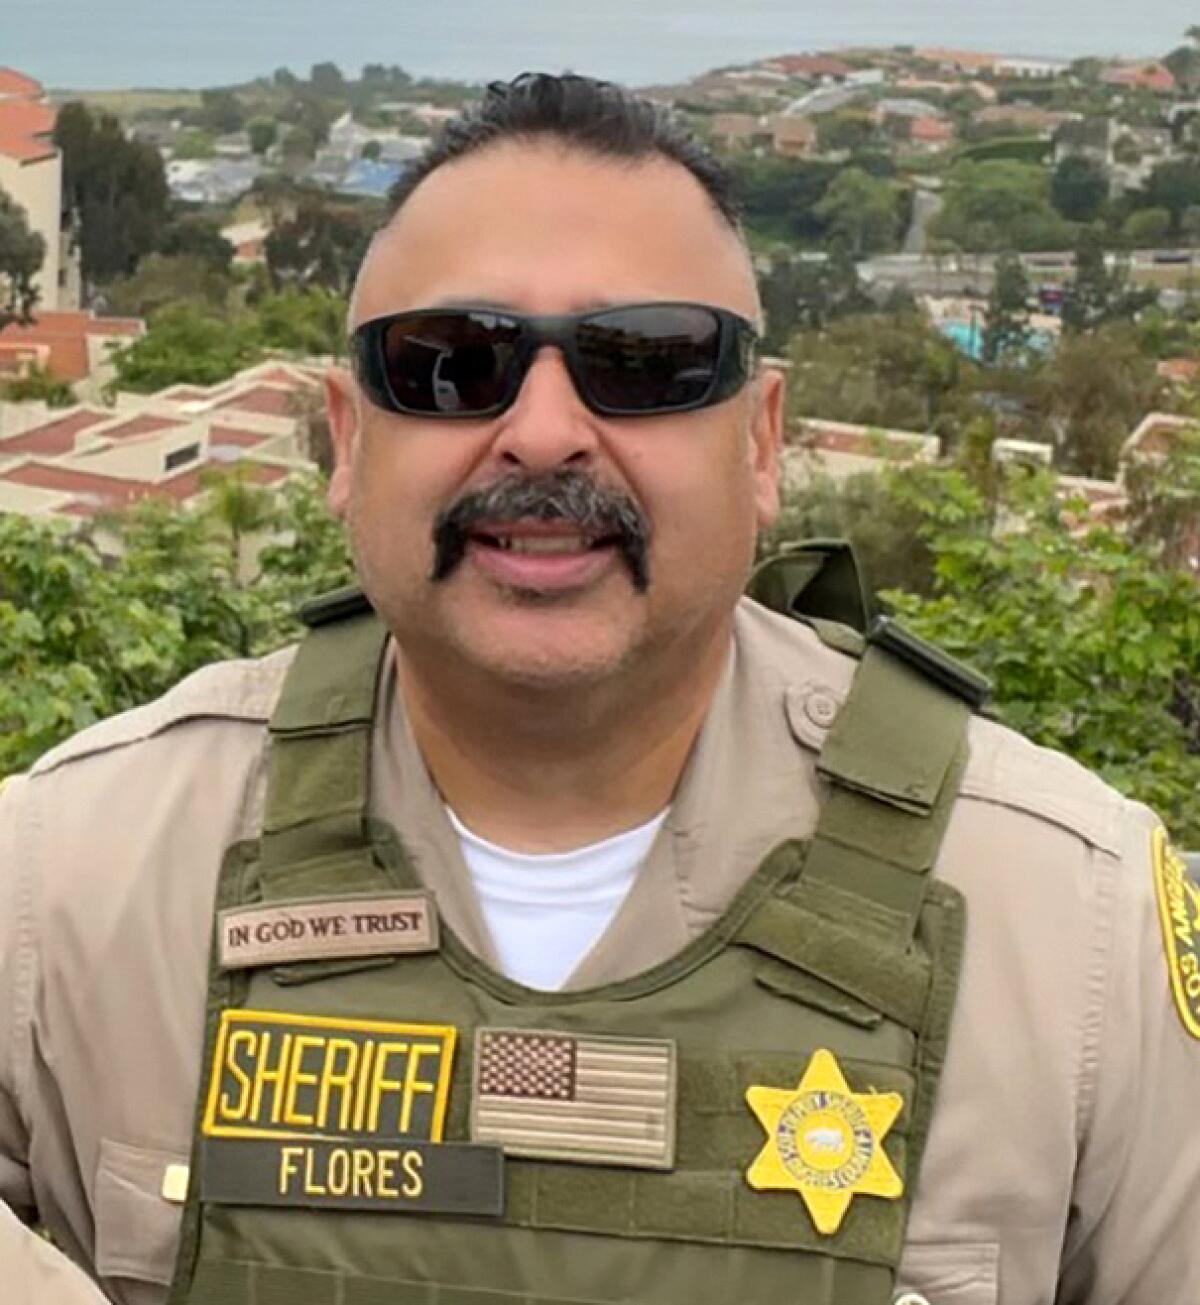 Portrait of late sheriff's Deputy Alfredo "Freddy" Flores wearing sunglasses and a vest with a badge and his name